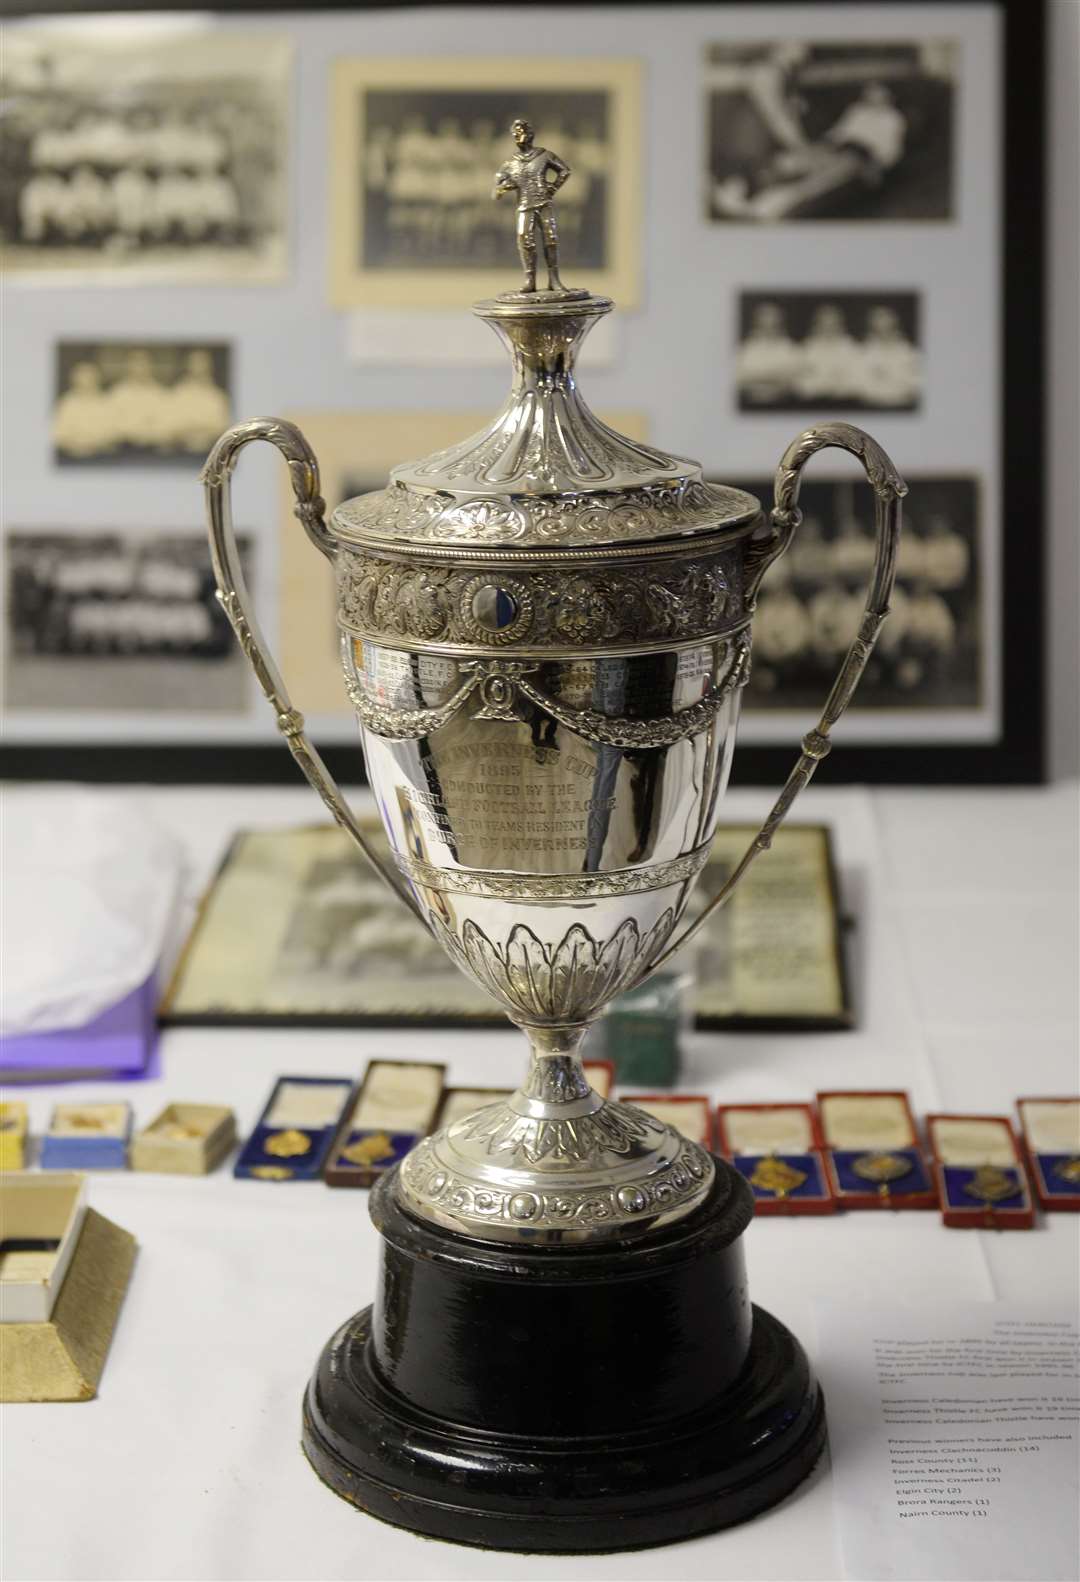 The Inverness Cup was among the memorabilia displayed at the launch of the Inverness Football Memories project.